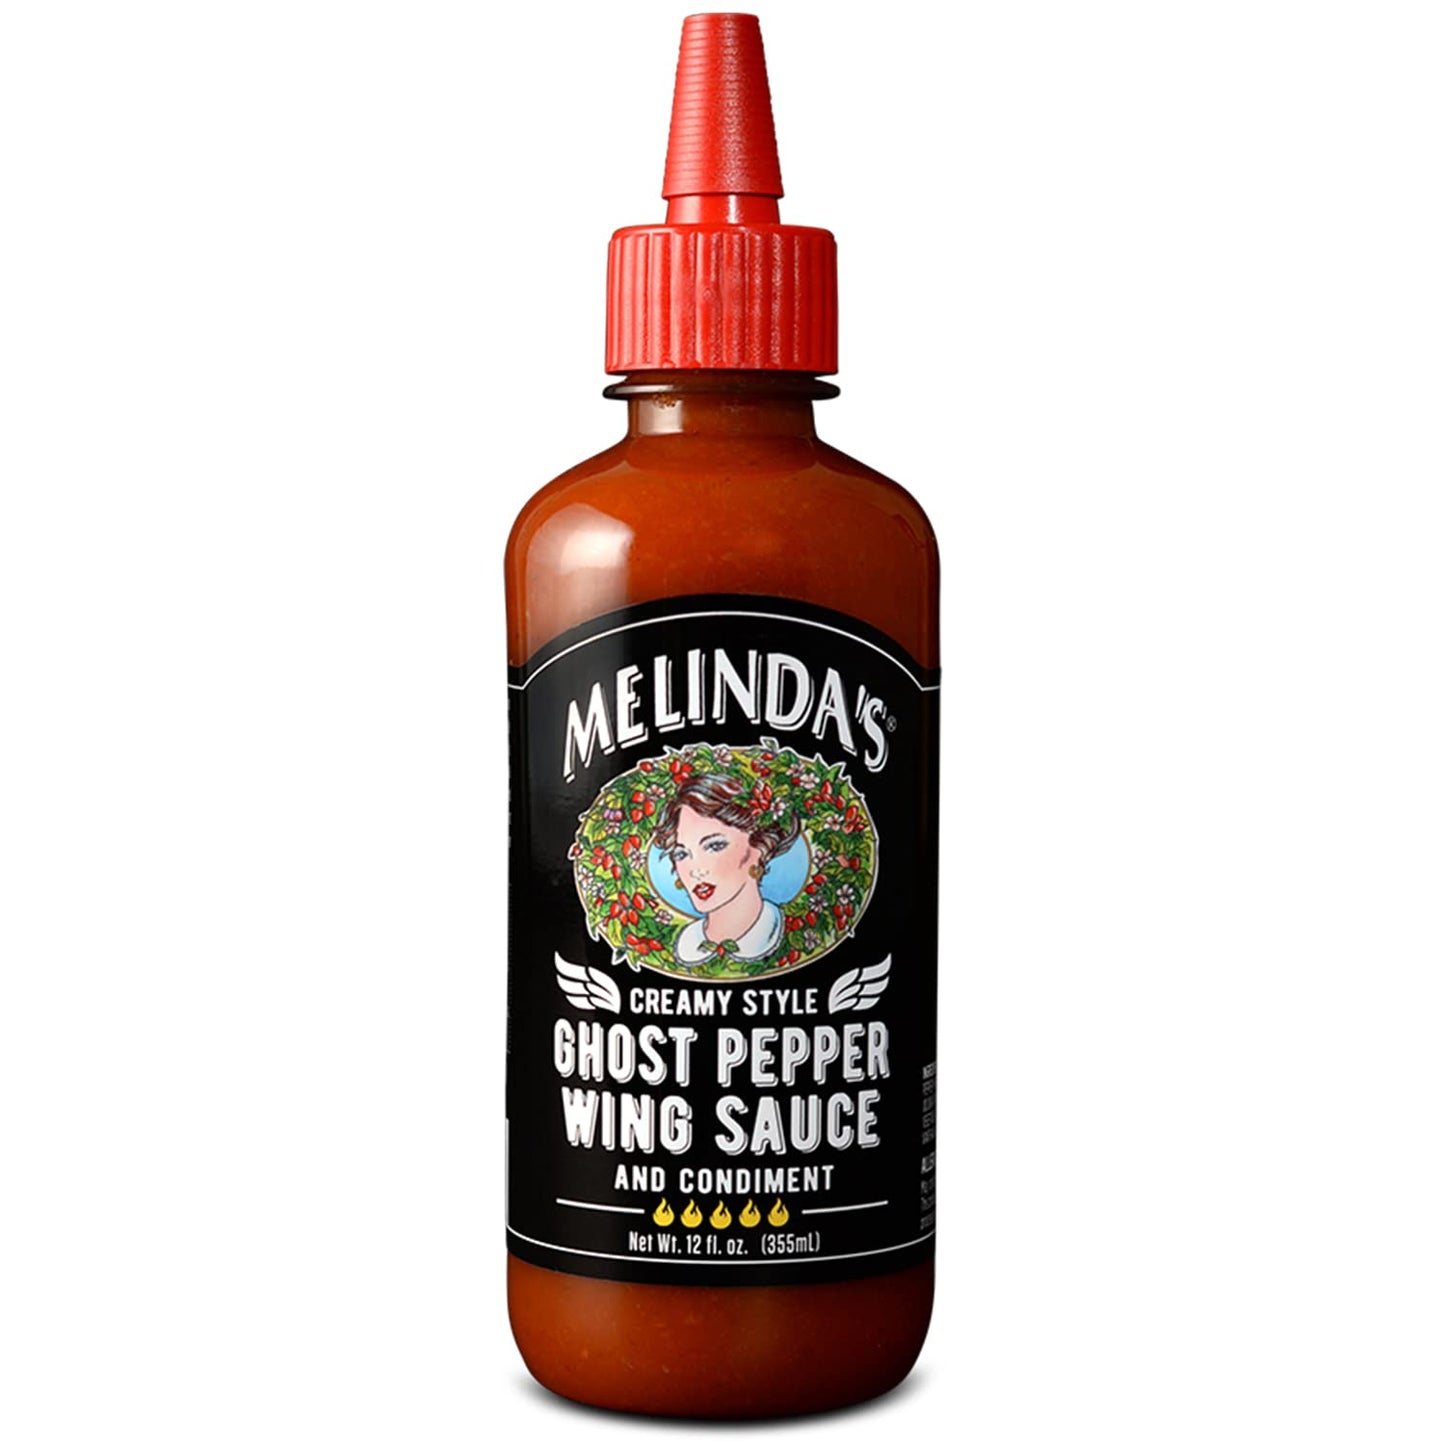 Melinda’s Creamy Style Ghost Pepper Wing Sauce